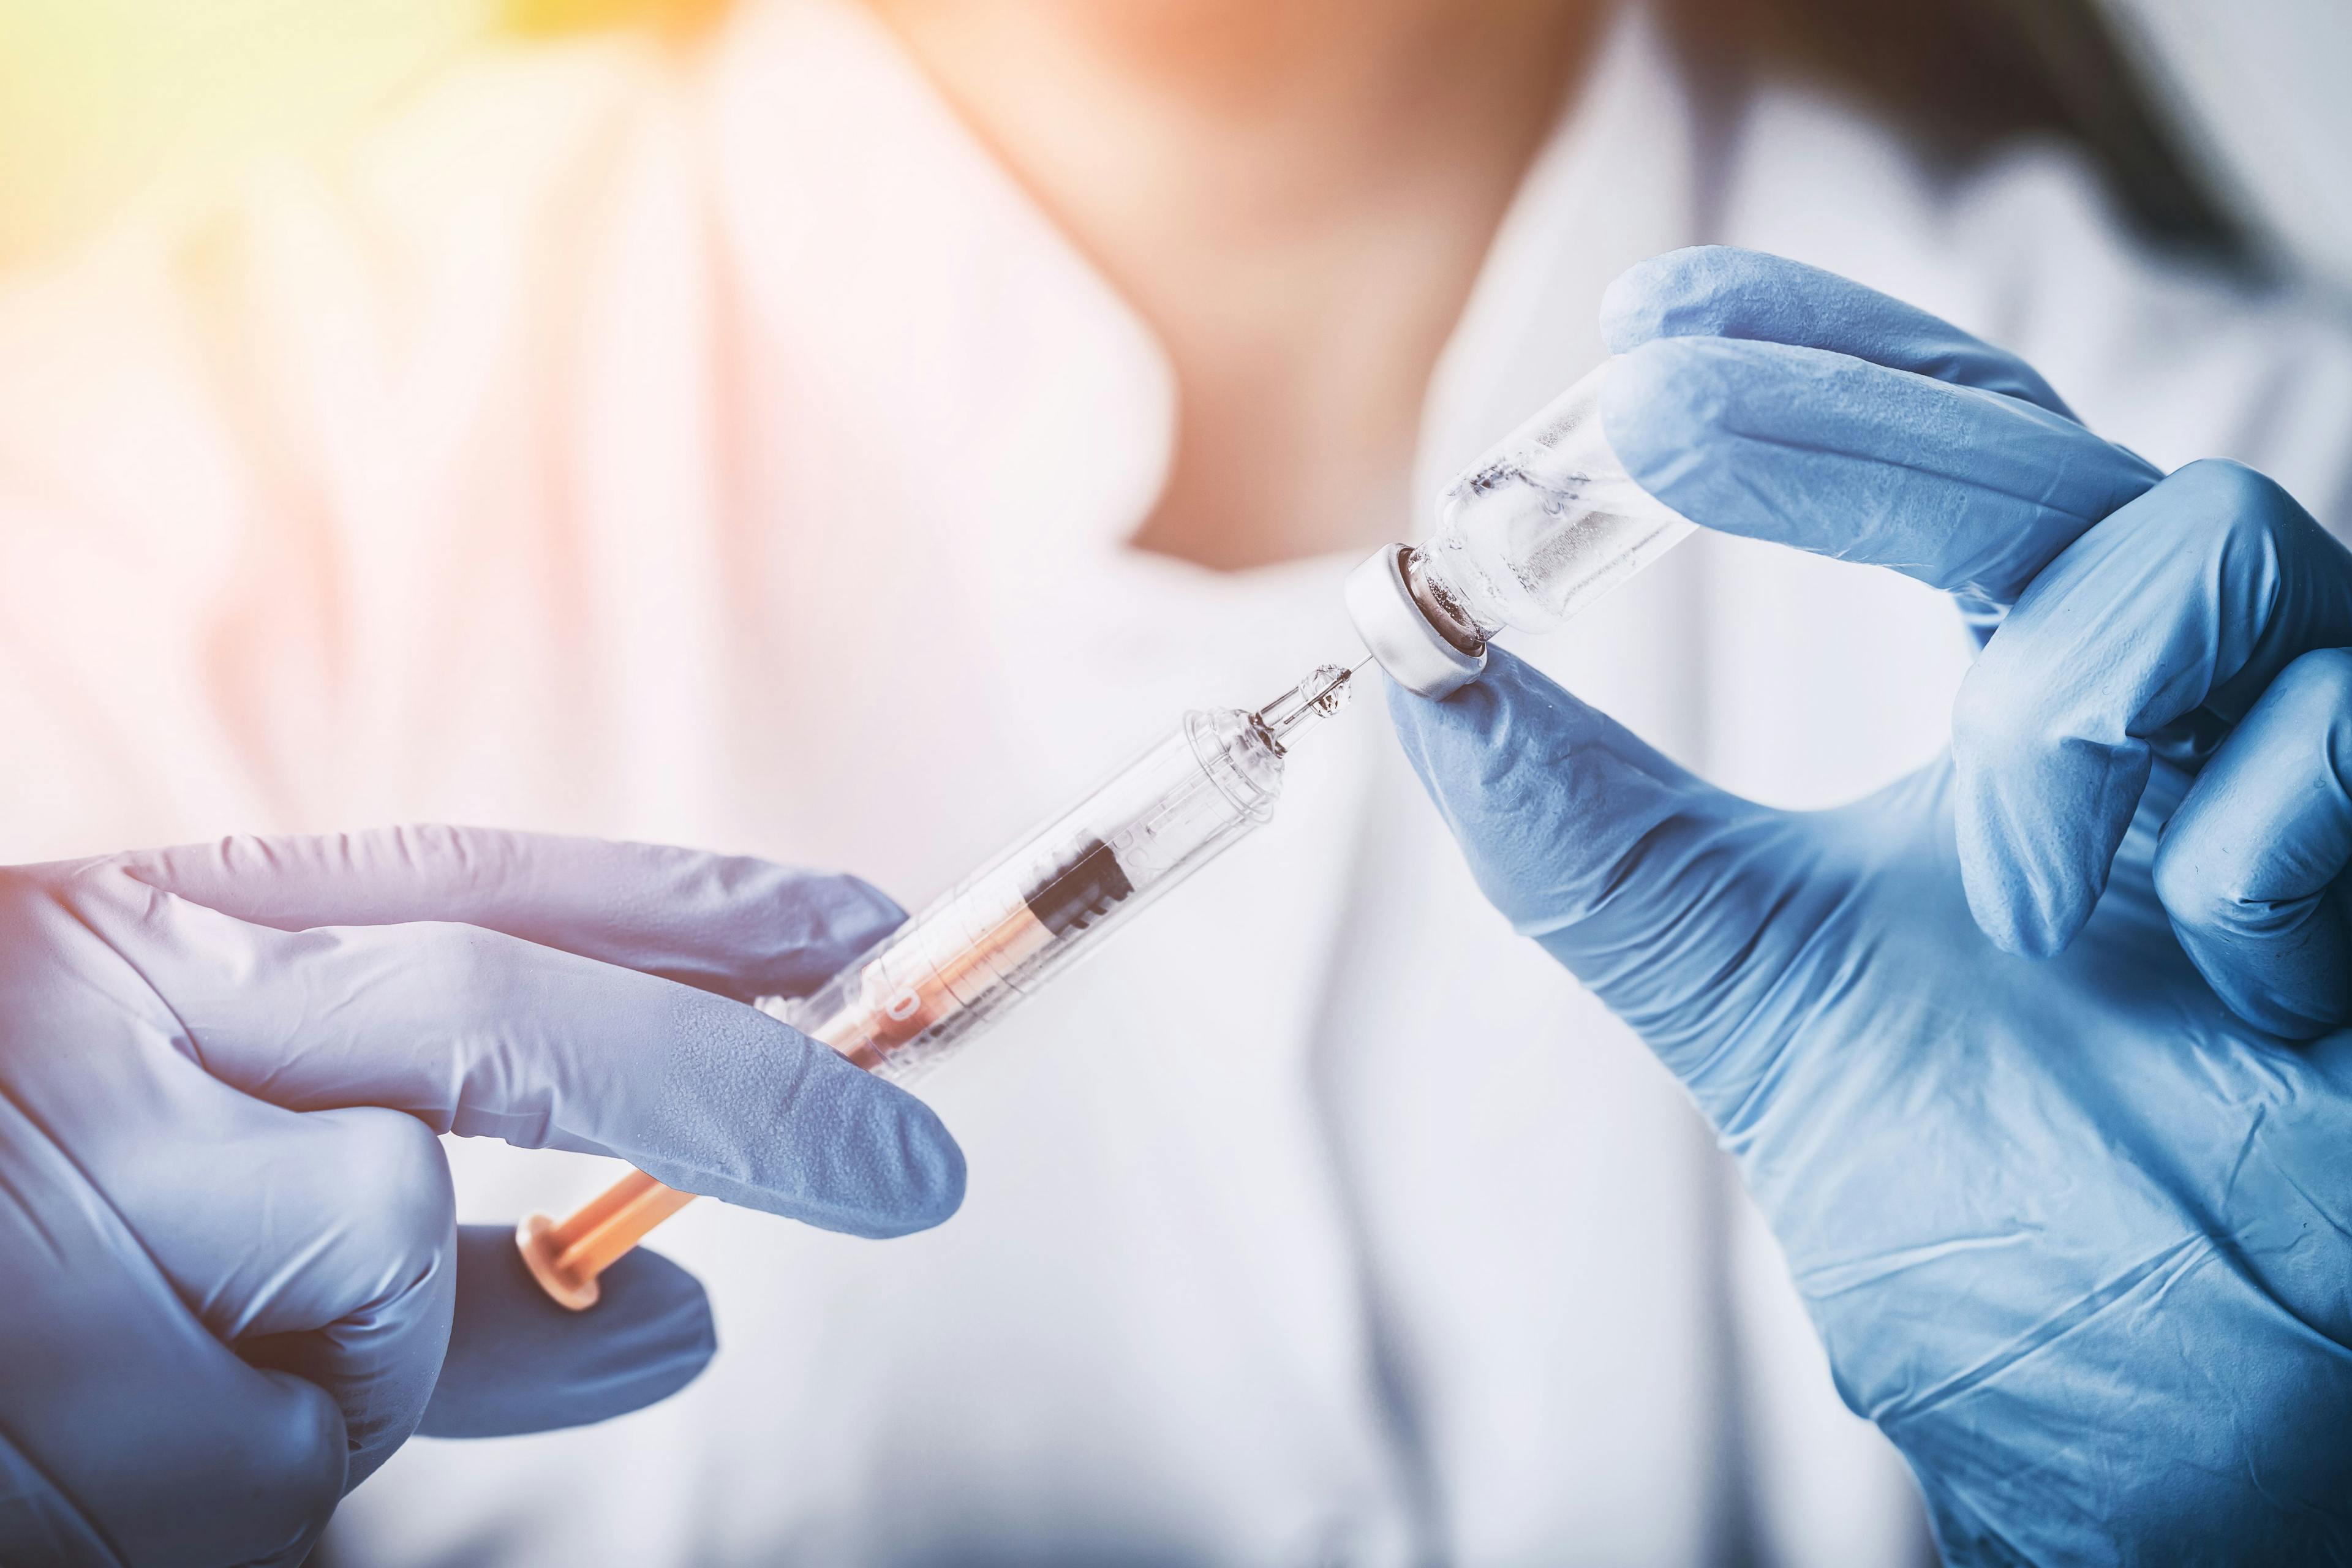 Breaking: Novavax Submits EUA Request for COVID-19 Vaccine Candidate